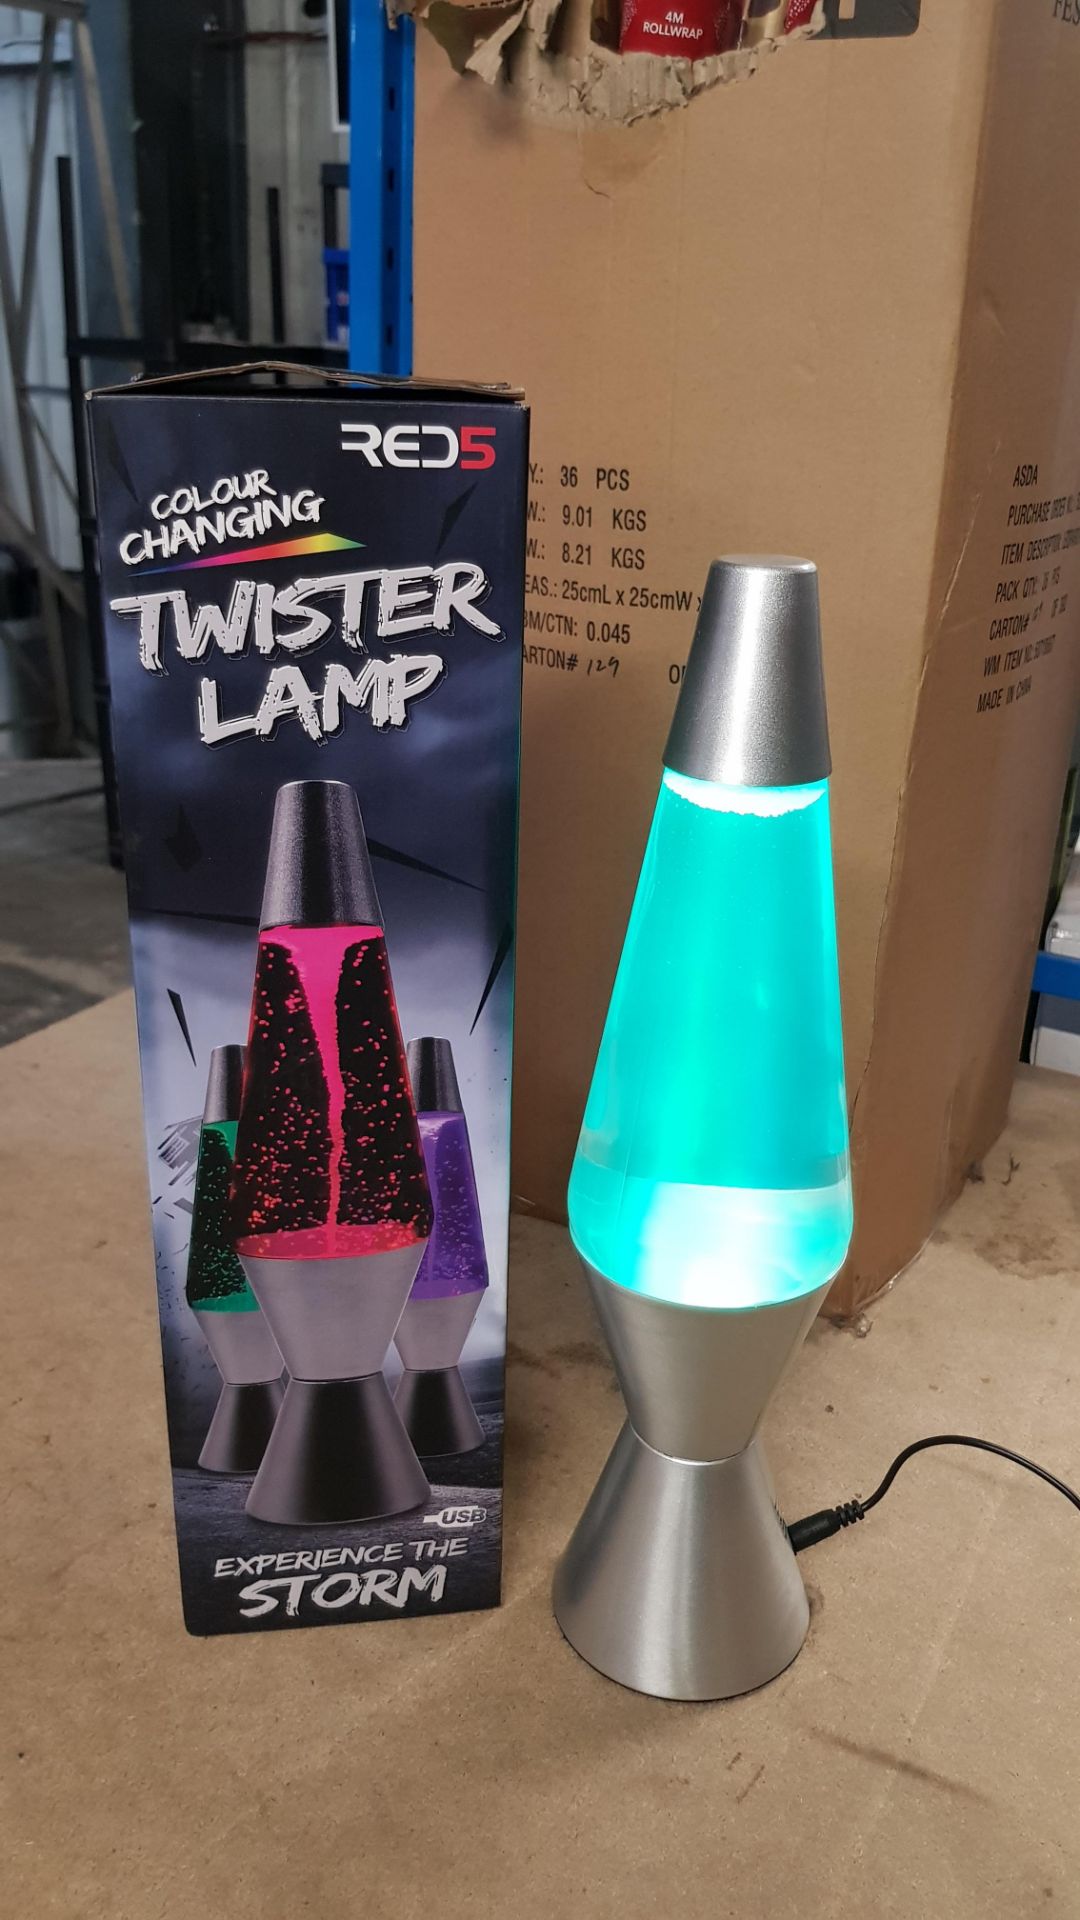 5x Red5 Colour Changing Twister Lamp RRP £14.99 Each. (Units Have RTM Sticker) - Image 4 of 5